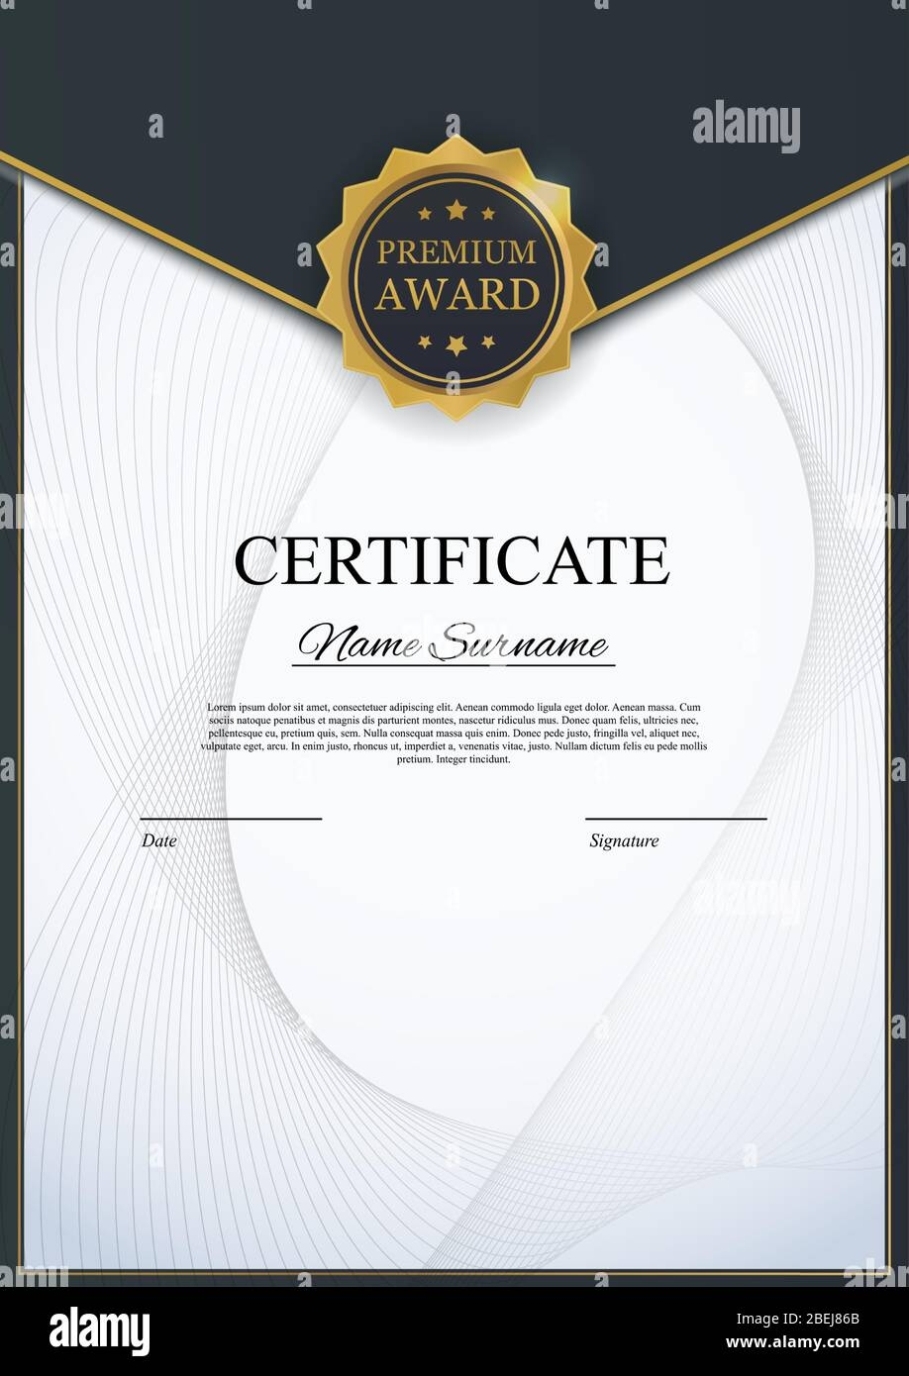 High Resolution Certificate Template Intended For High Resolution Certificate Template